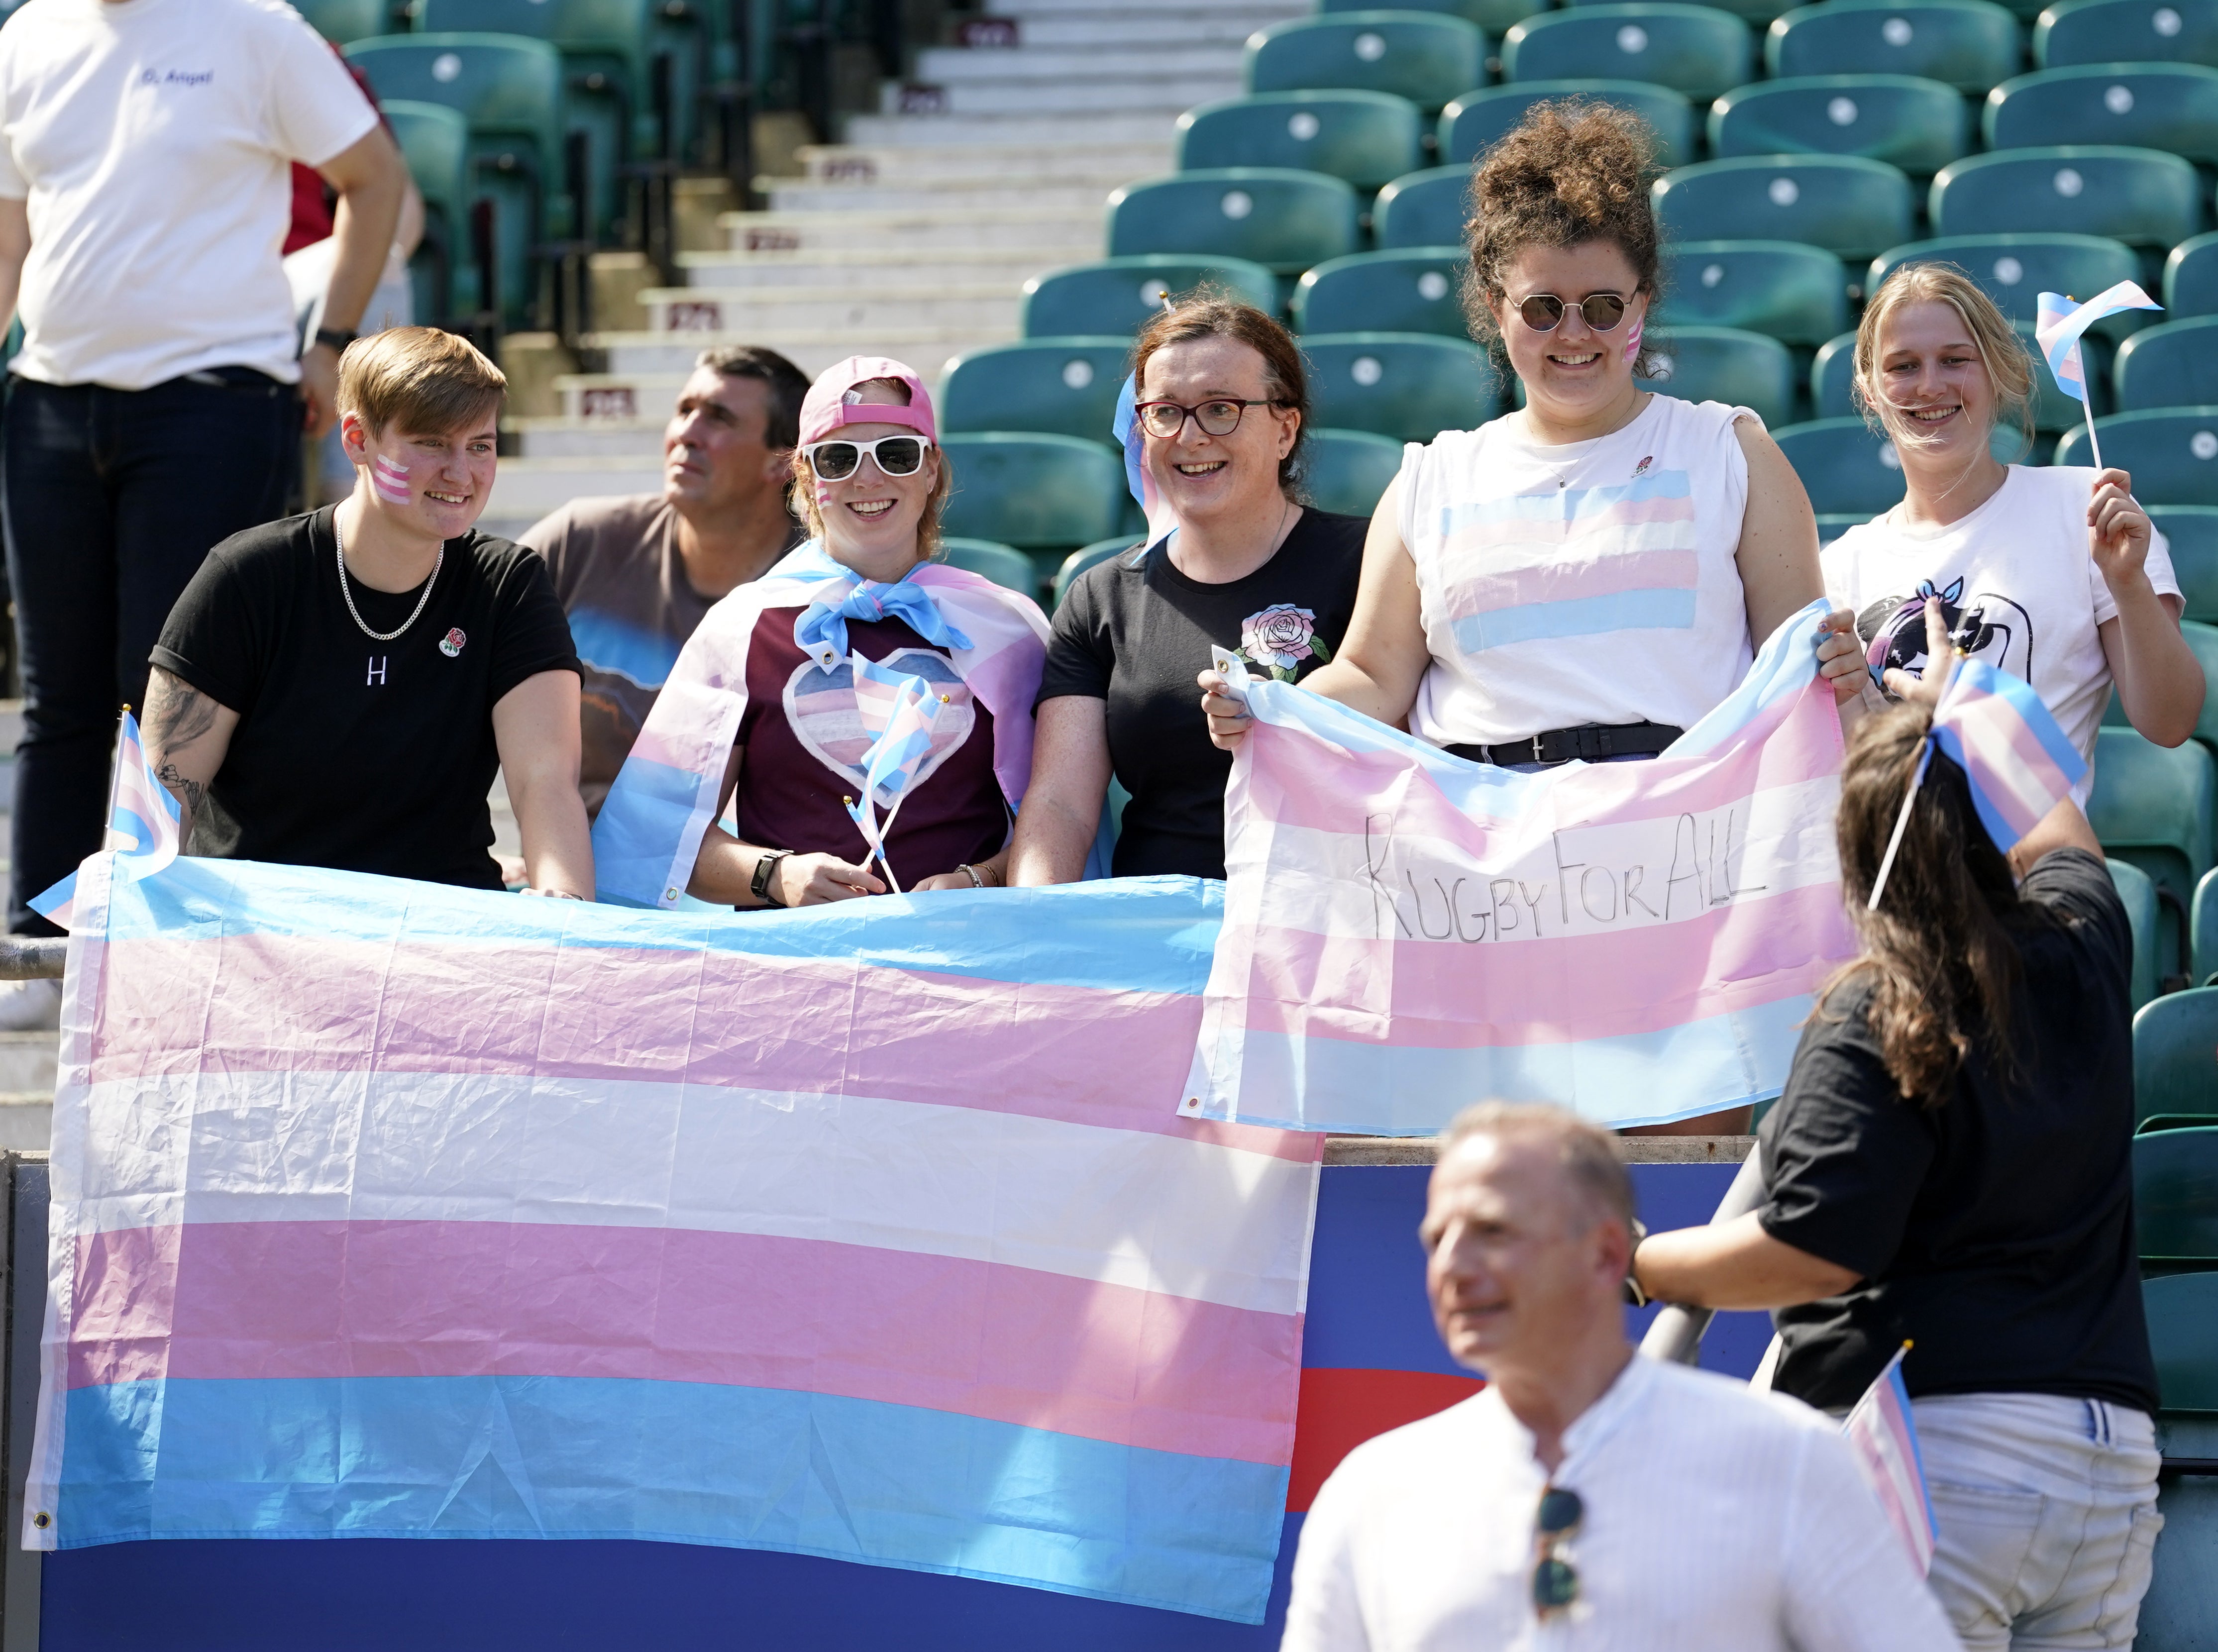 England fans with Transgender Pride flags in the stands after an open training session at Twickenham (Andrew Matthews/PA)